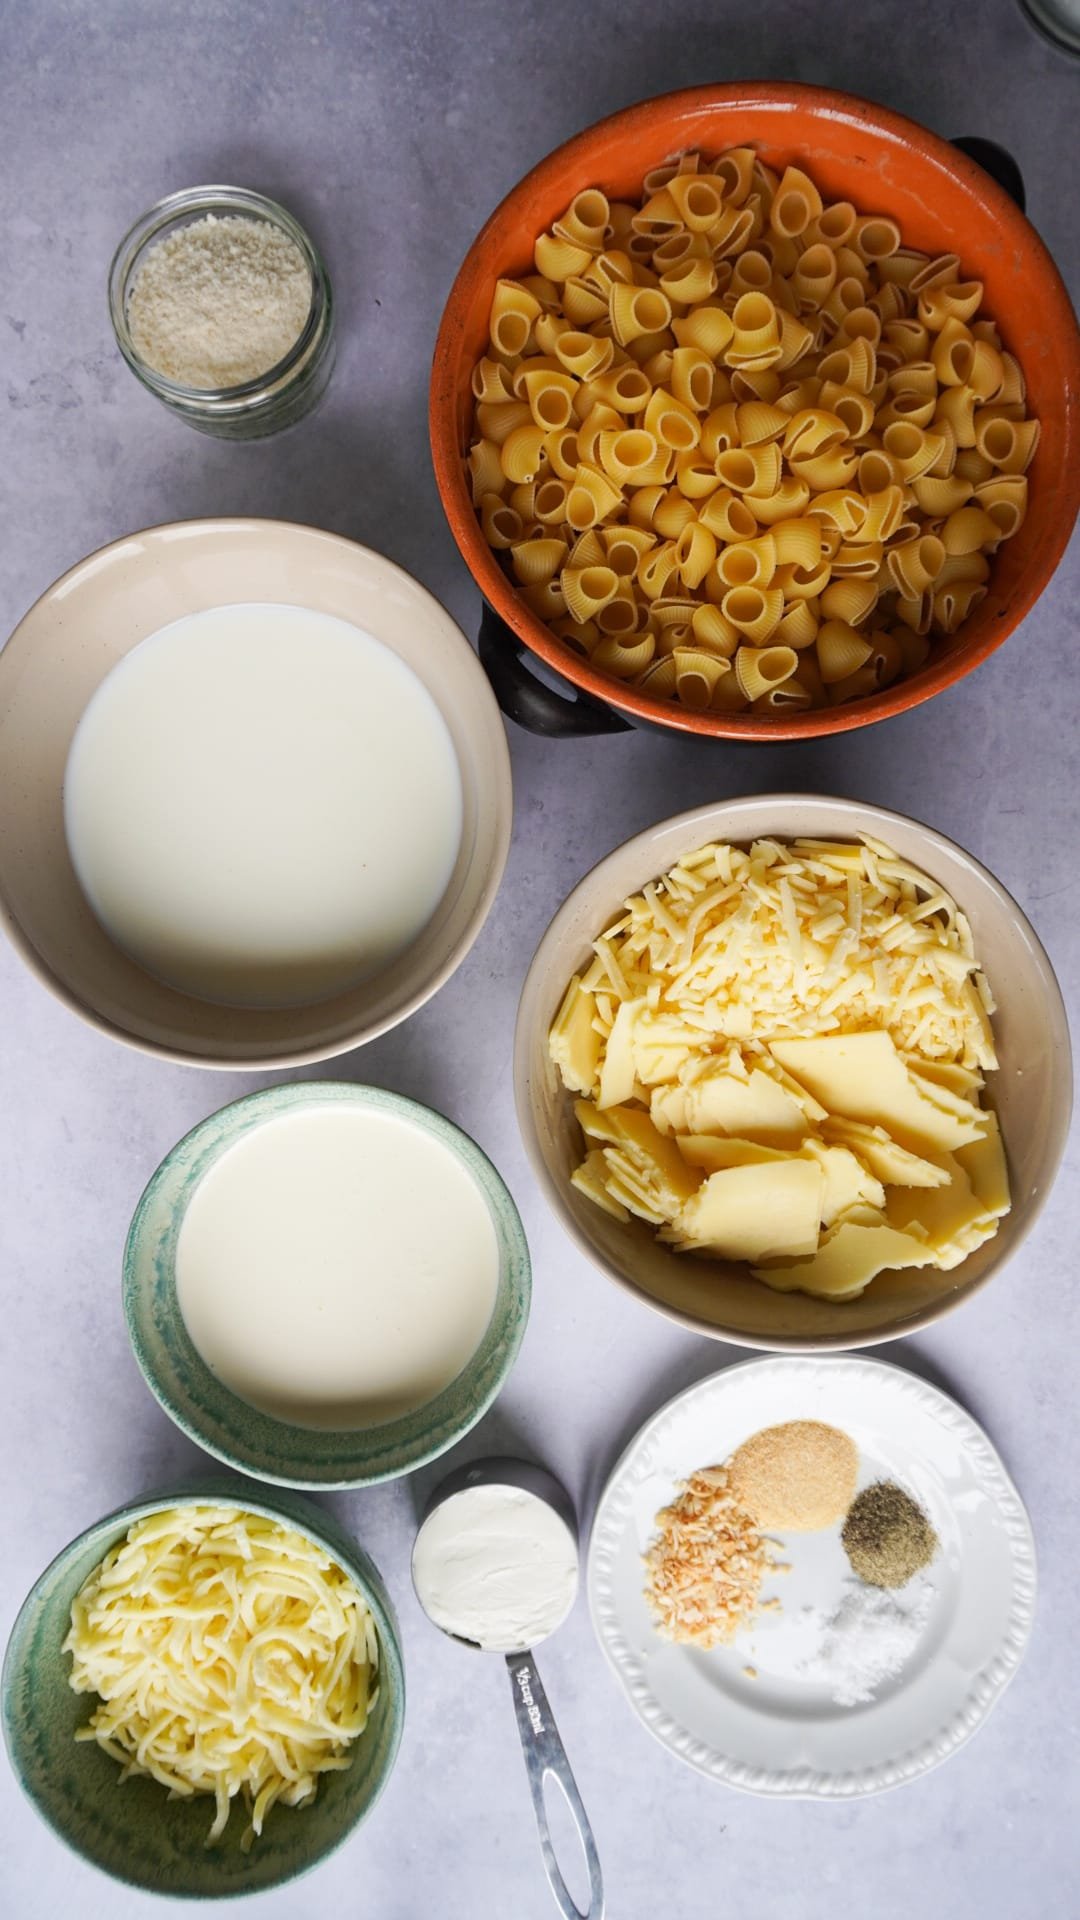 The ingredients needed to make your One Pot Super Simple Mac and Cheese